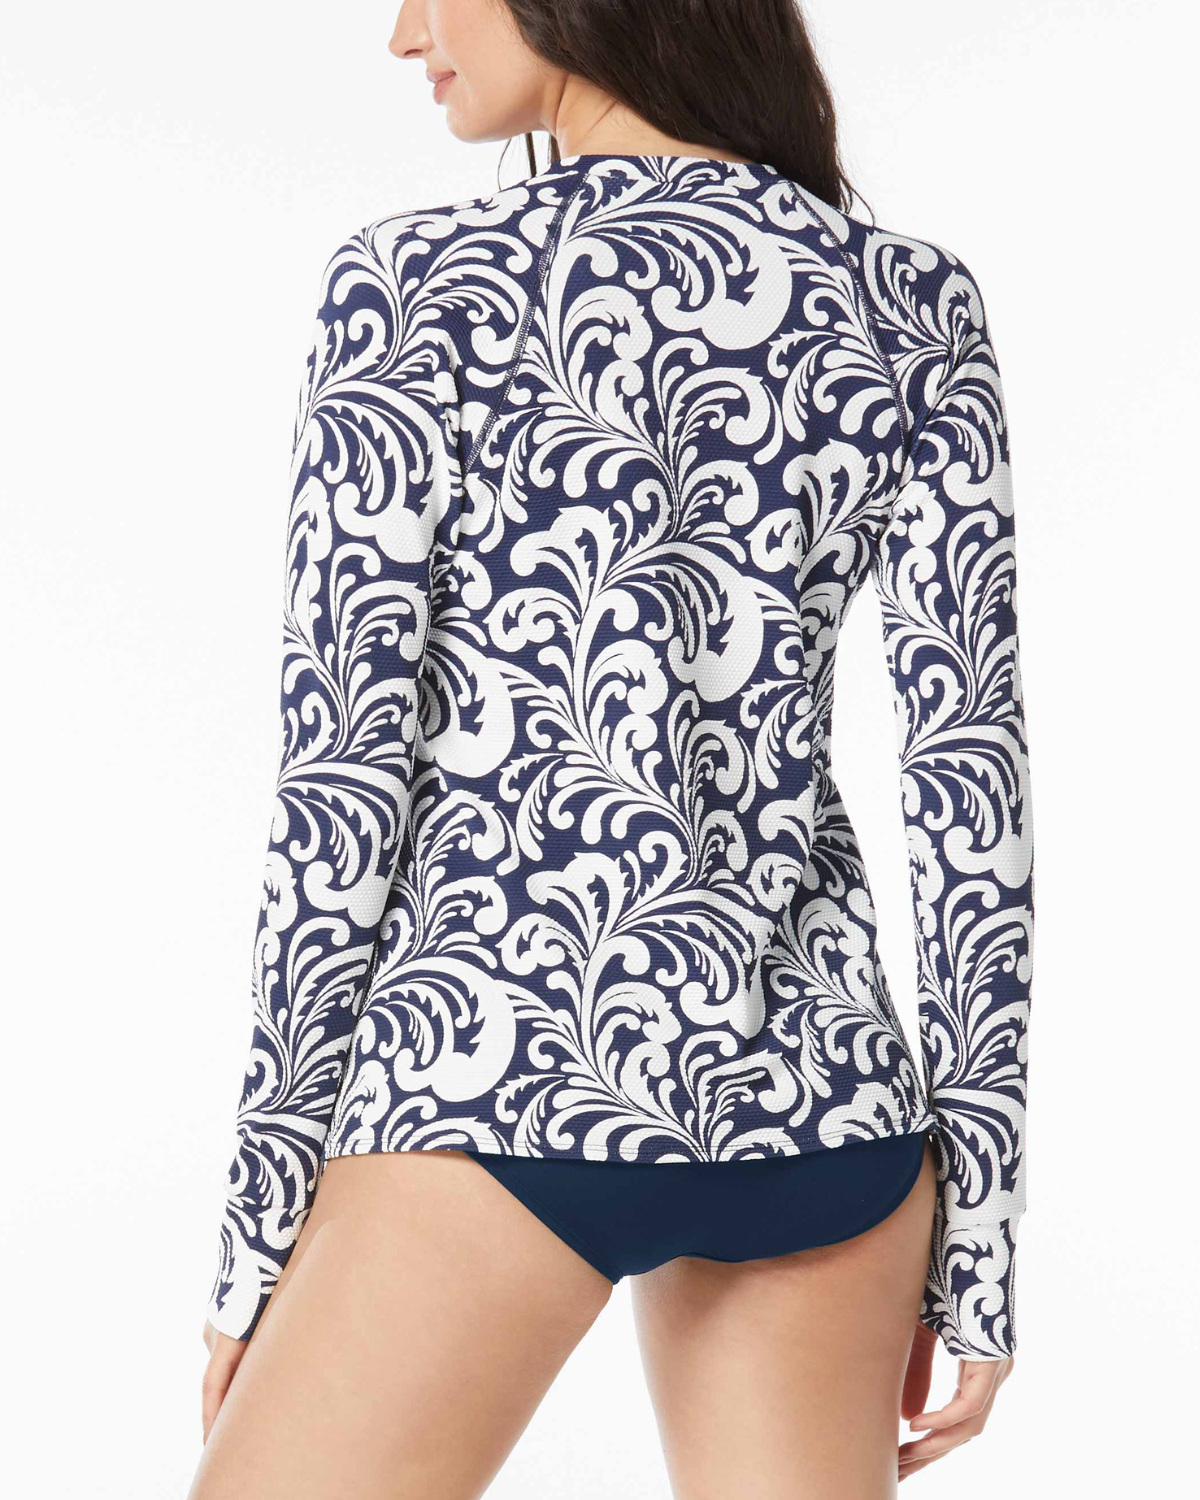 Model wearing a piqued fabric relaxed fit rash guard in a navy and white scroll print